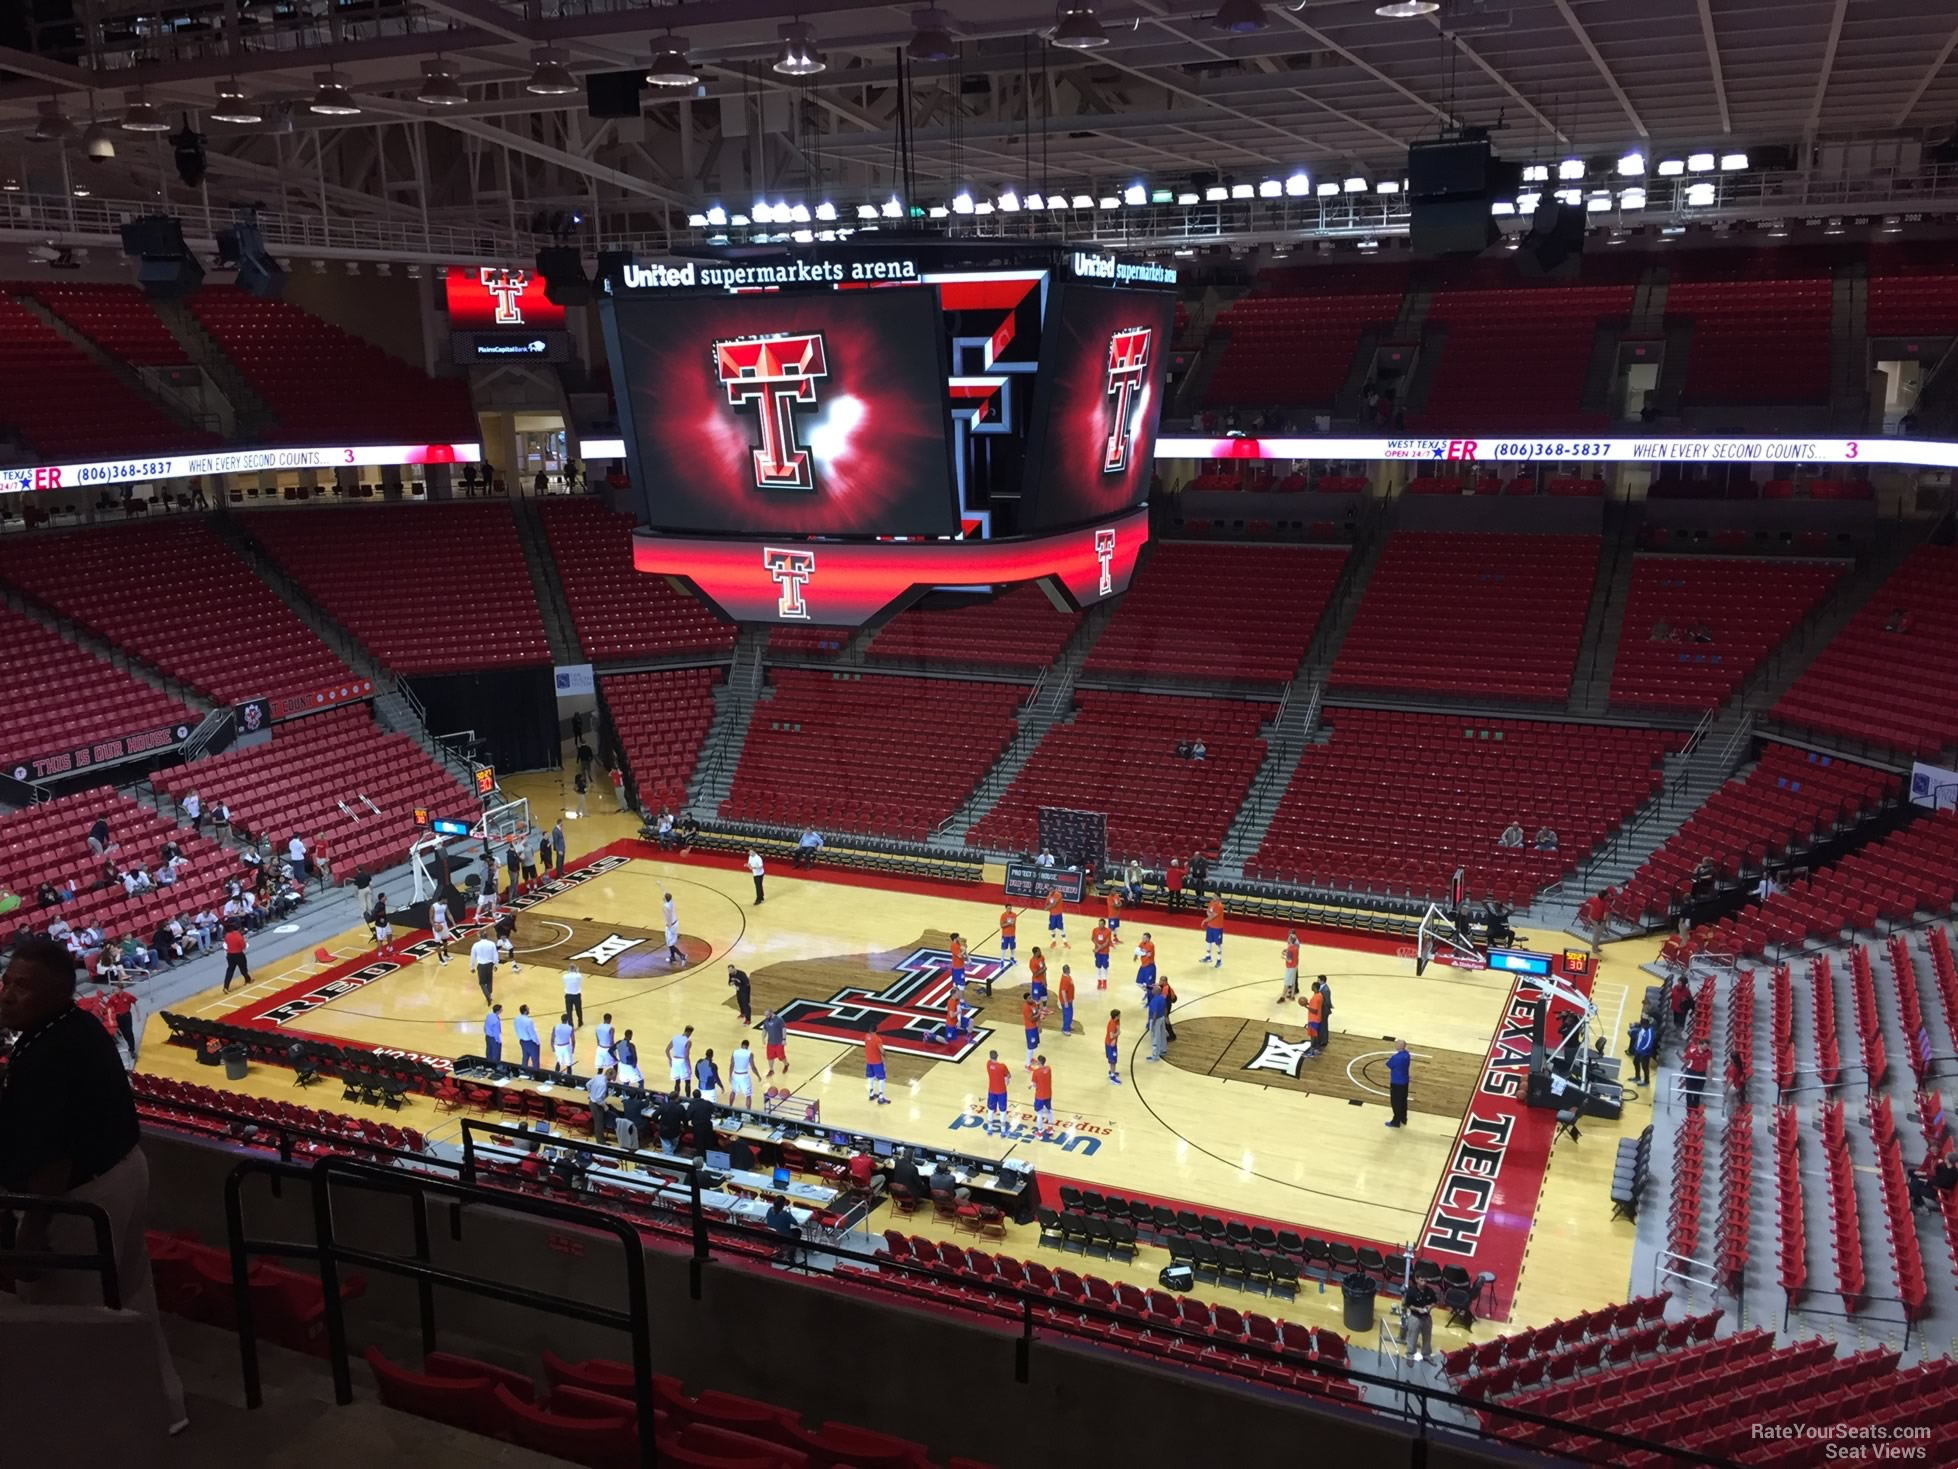 section 215, row 7 seat view  - united supermarkets arena